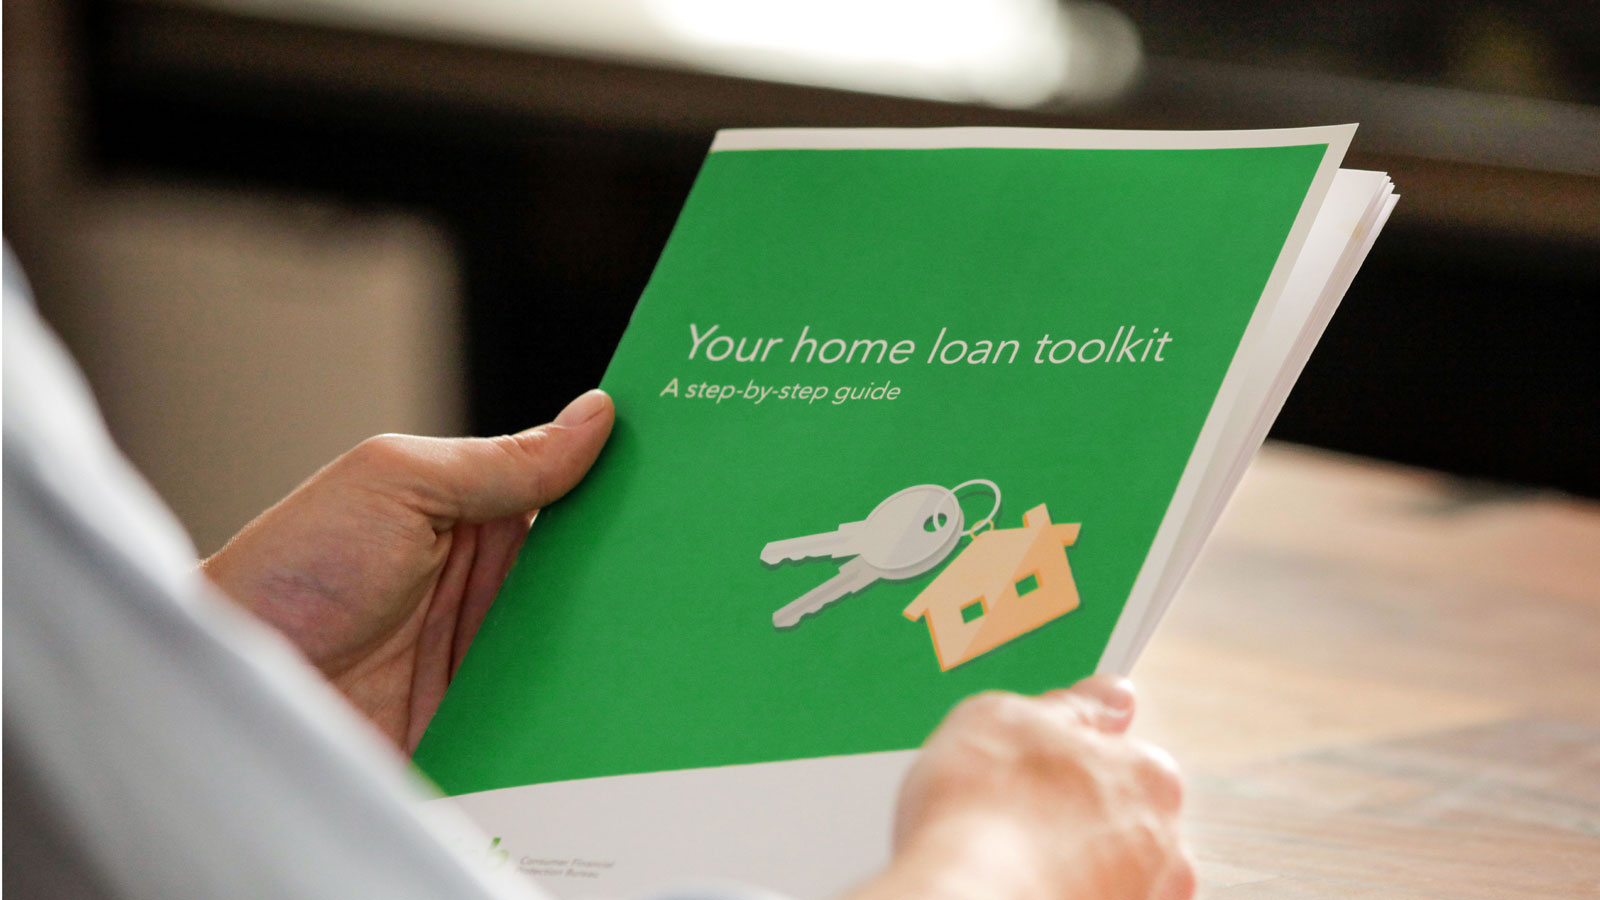 Understanding the mortgage process: Your home loan toolkit